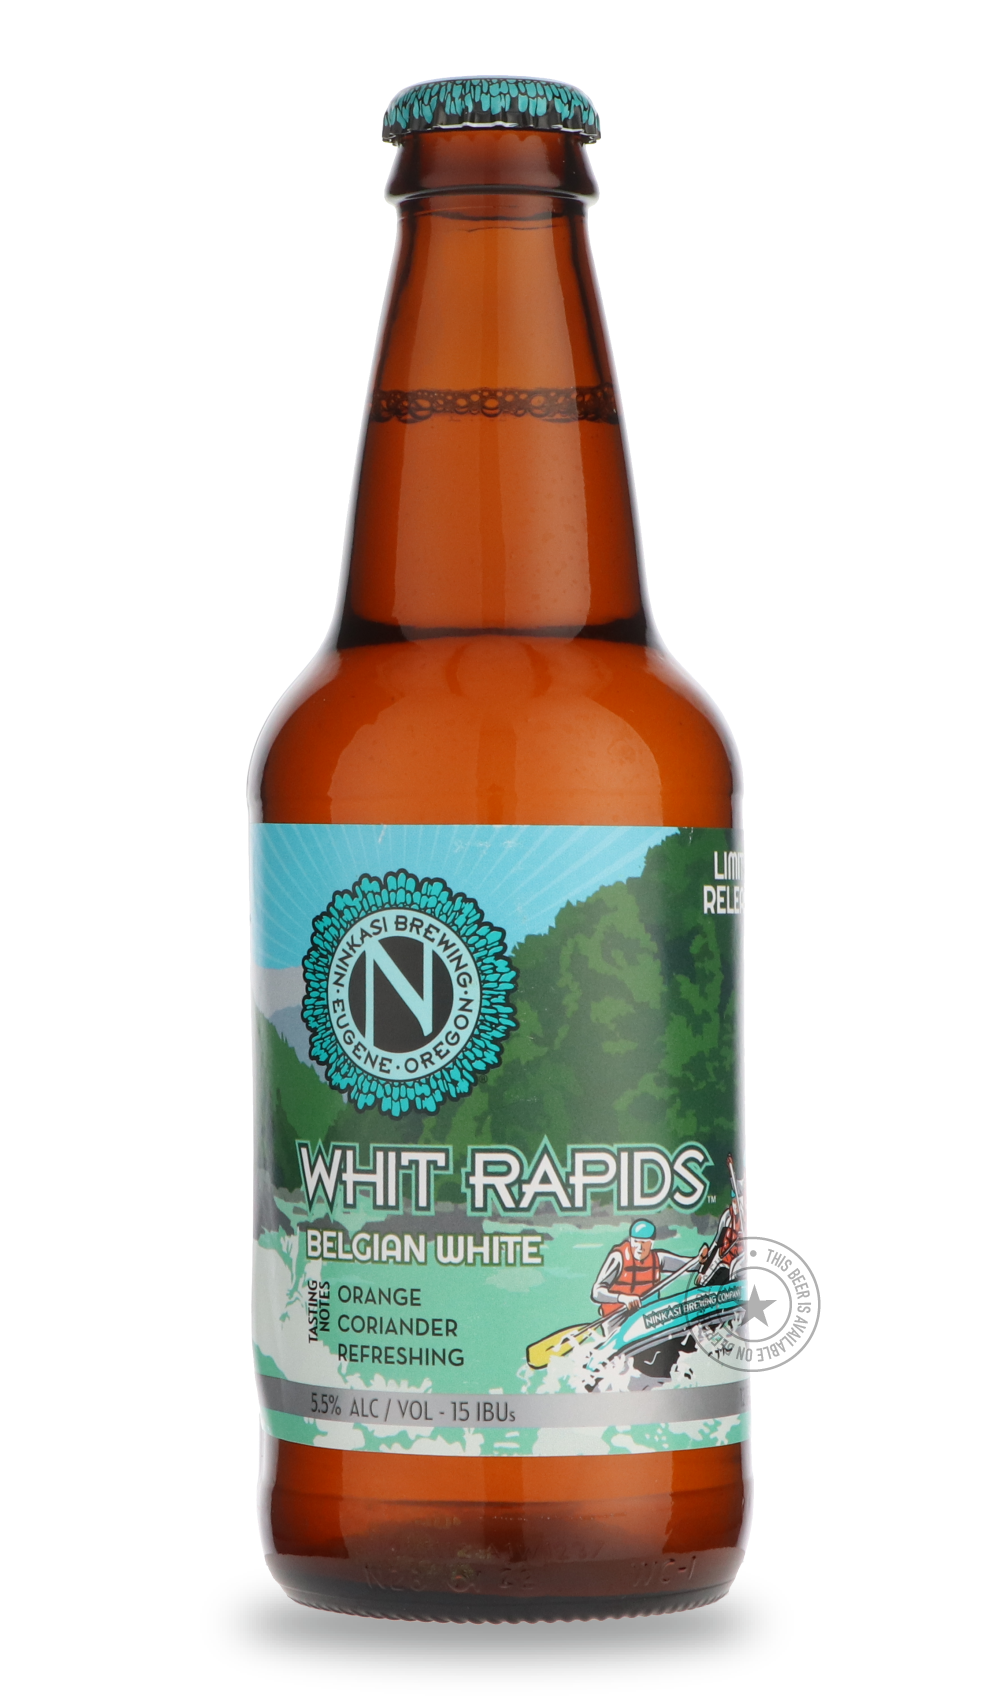 -Ninkasi- Whit Rapids-Pale- Only @ Beer Republic - The best online beer store for American & Canadian craft beer - Buy beer online from the USA and Canada - Bier online kopen - Amerikaans bier kopen - Craft beer store - Craft beer kopen - Amerikanisch bier kaufen - Bier online kaufen - Acheter biere online - IPA - Stout - Porter - New England IPA - Hazy IPA - Imperial Stout - Barrel Aged - Barrel Aged Imperial Stout - Brown - Dark beer - Blond - Blonde - Pilsner - Lager - Wheat - Weizen - Amber - Barley Win